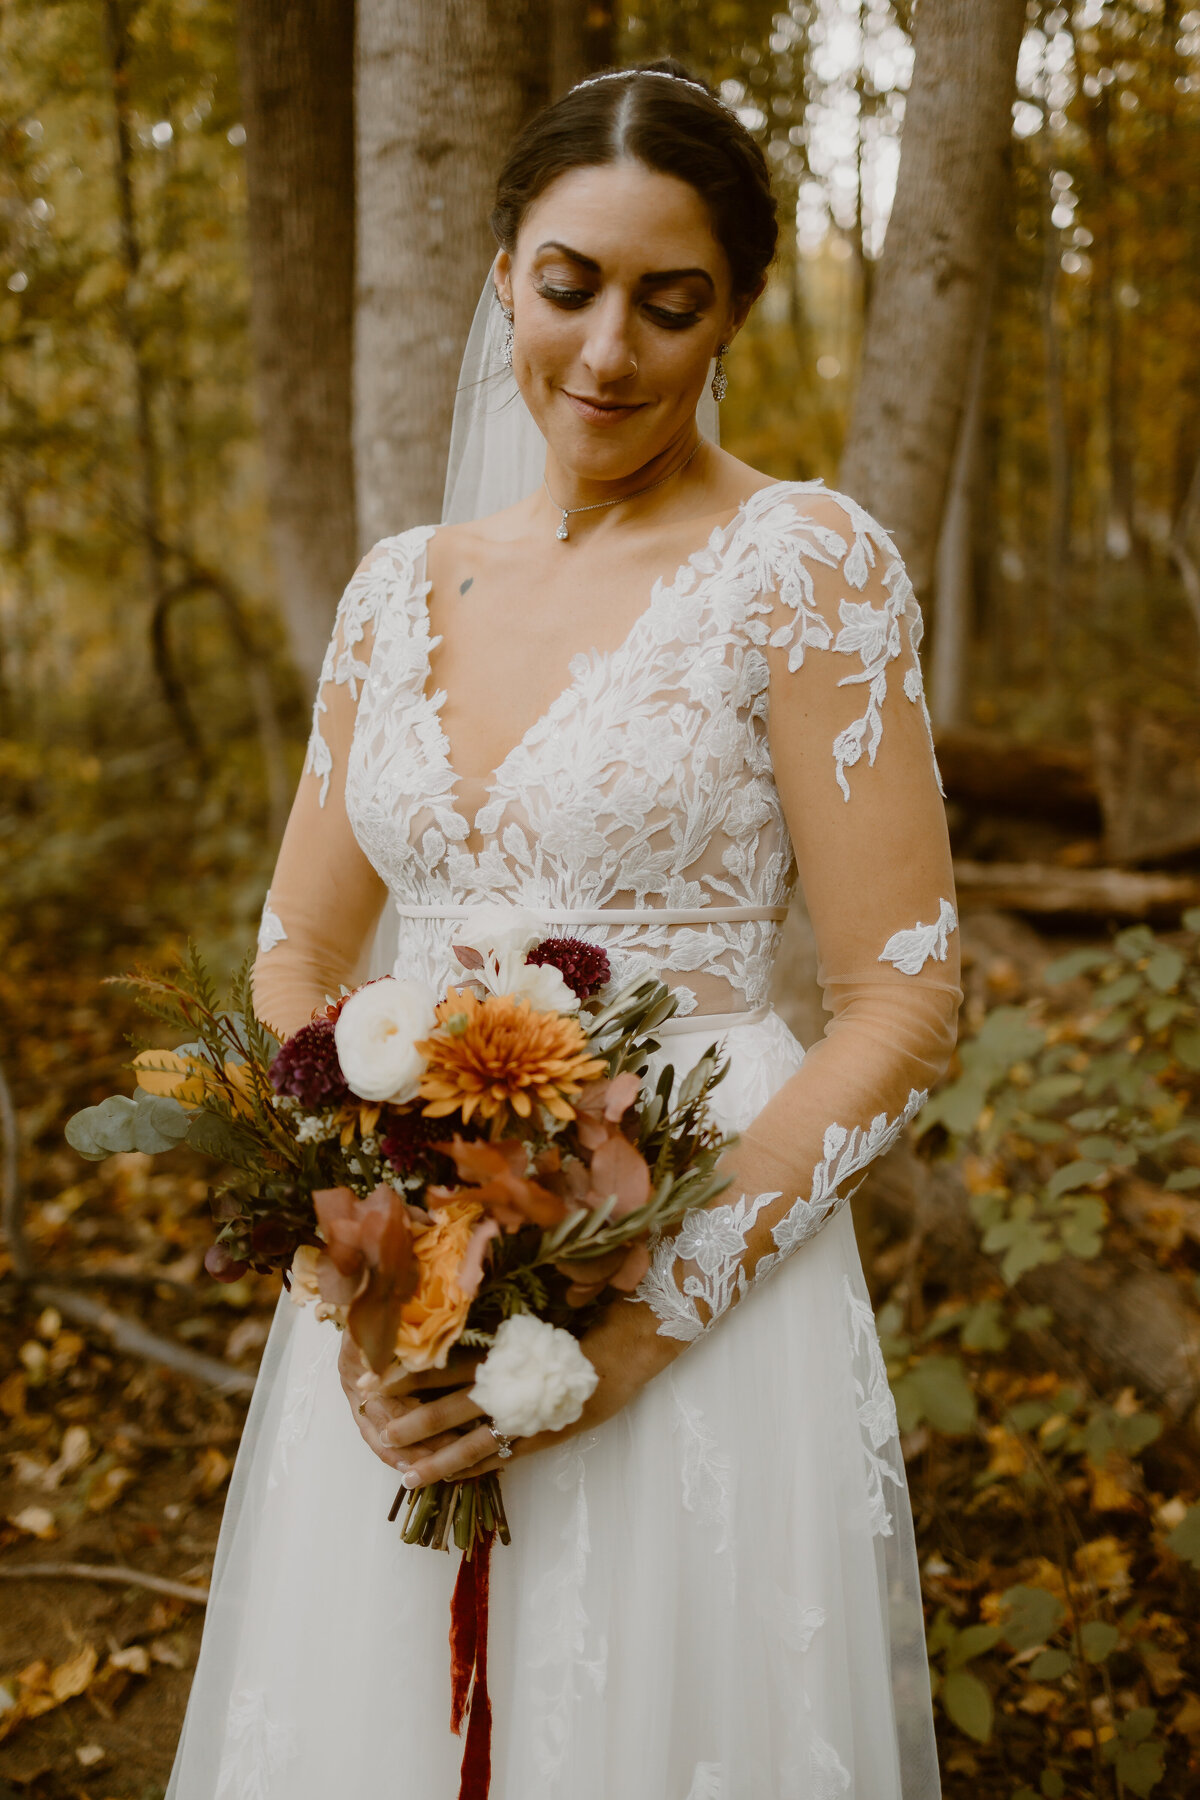 A bride stands in an autumn forest while holding flowers